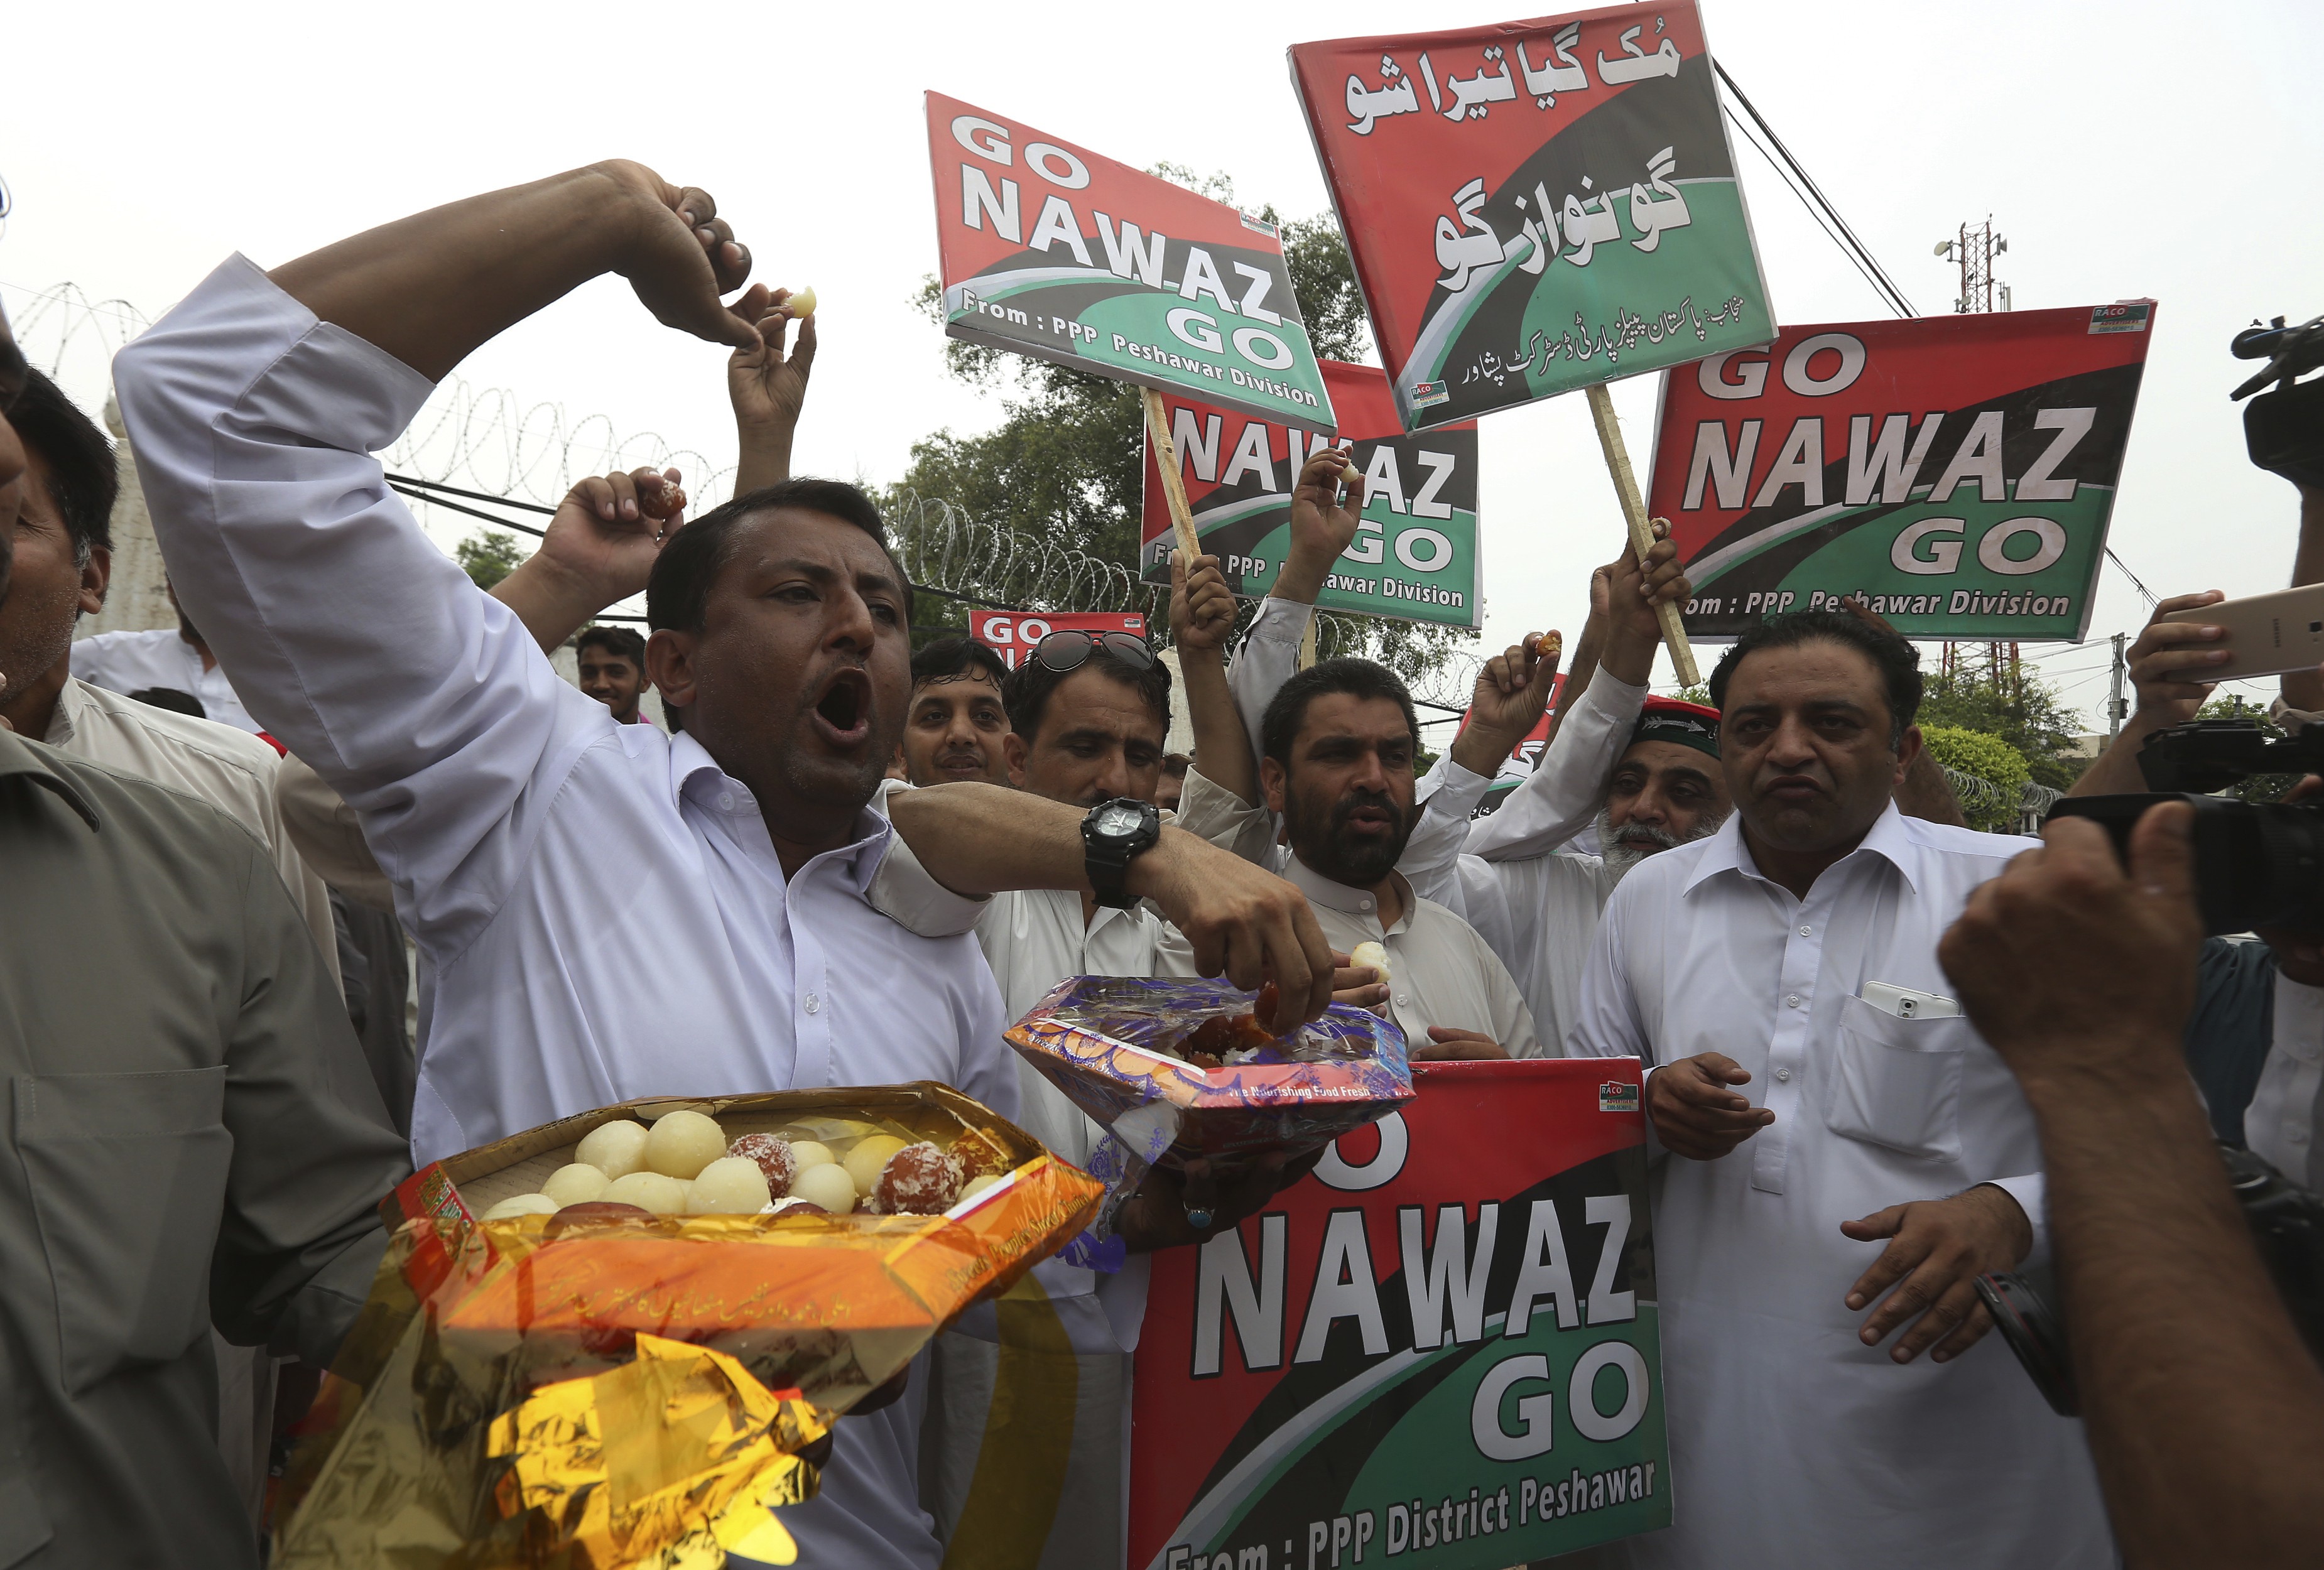 Supporters of the opposition Pakistan People’s Party celebrate the dismissal of prime minister Nawaz Sharif, in Peshawar on July 28. Photo: